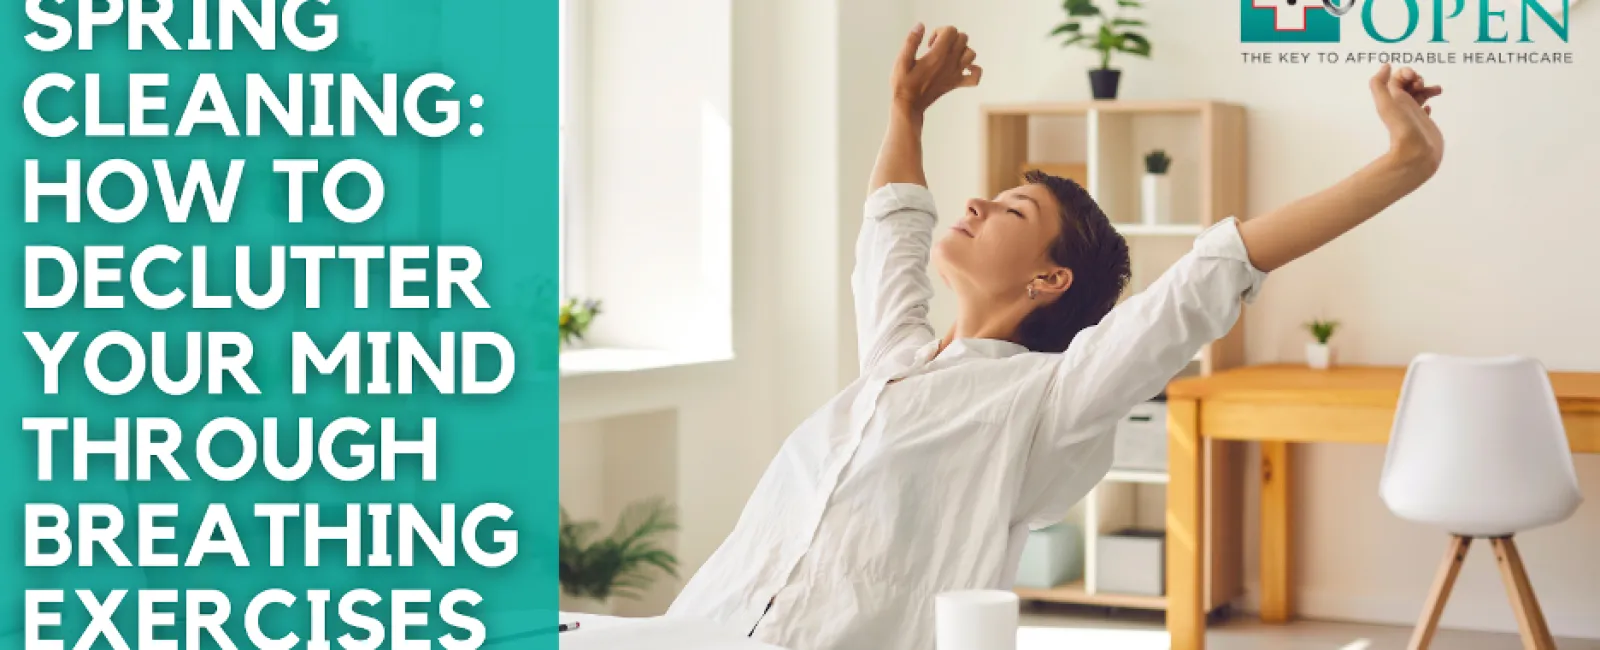 Spring Cleaning: How to Declutter Your Mind Through Breathing Exercises